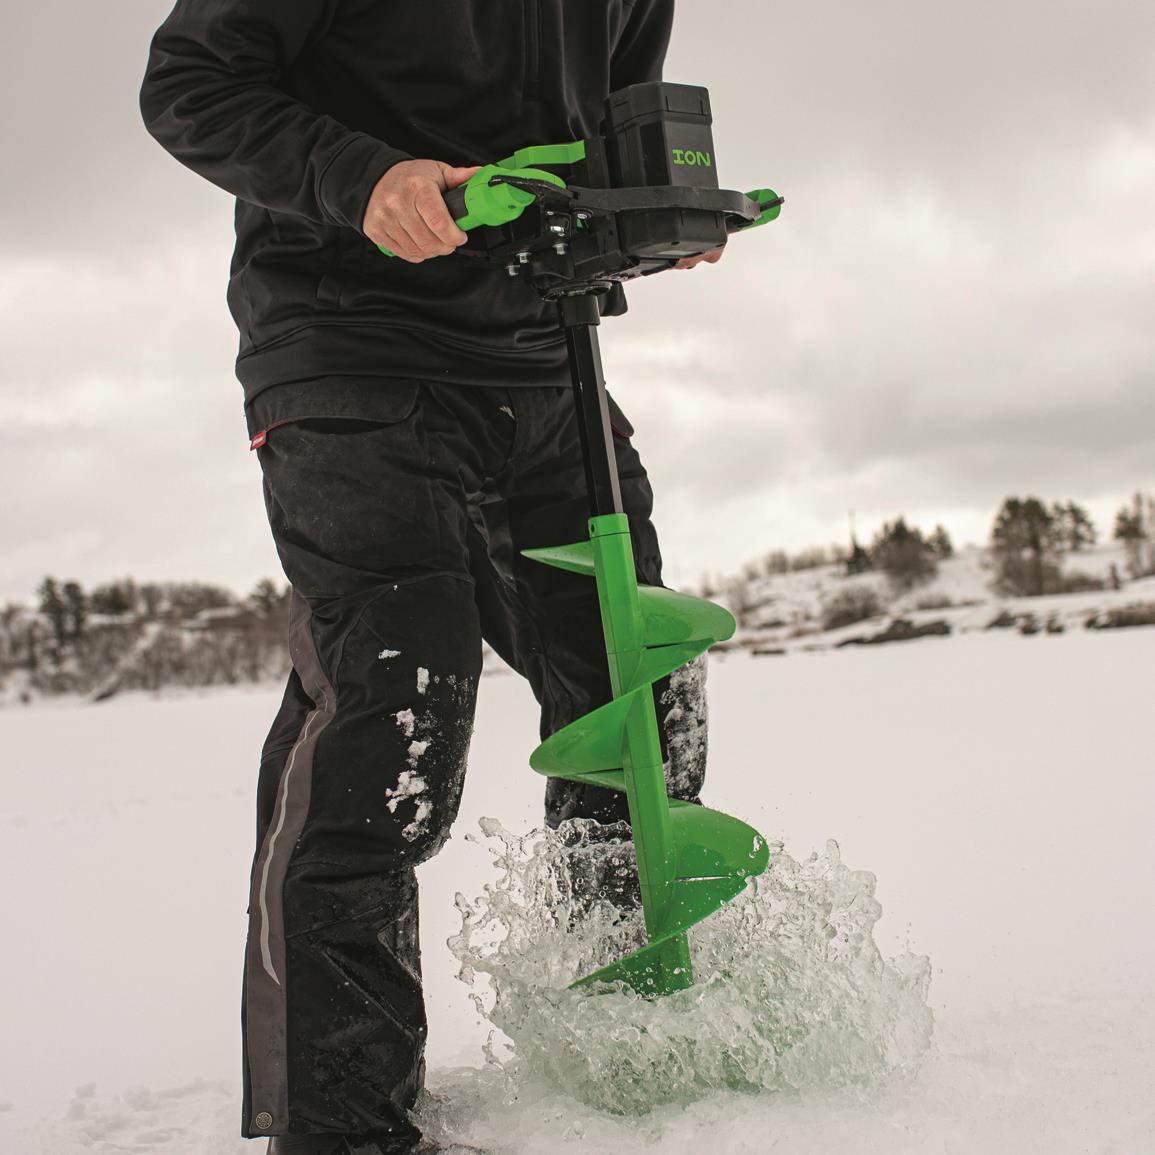 Jiffy Rogue 80V Electric Ice Fishing Auger w/ 6 XT Auger Bit